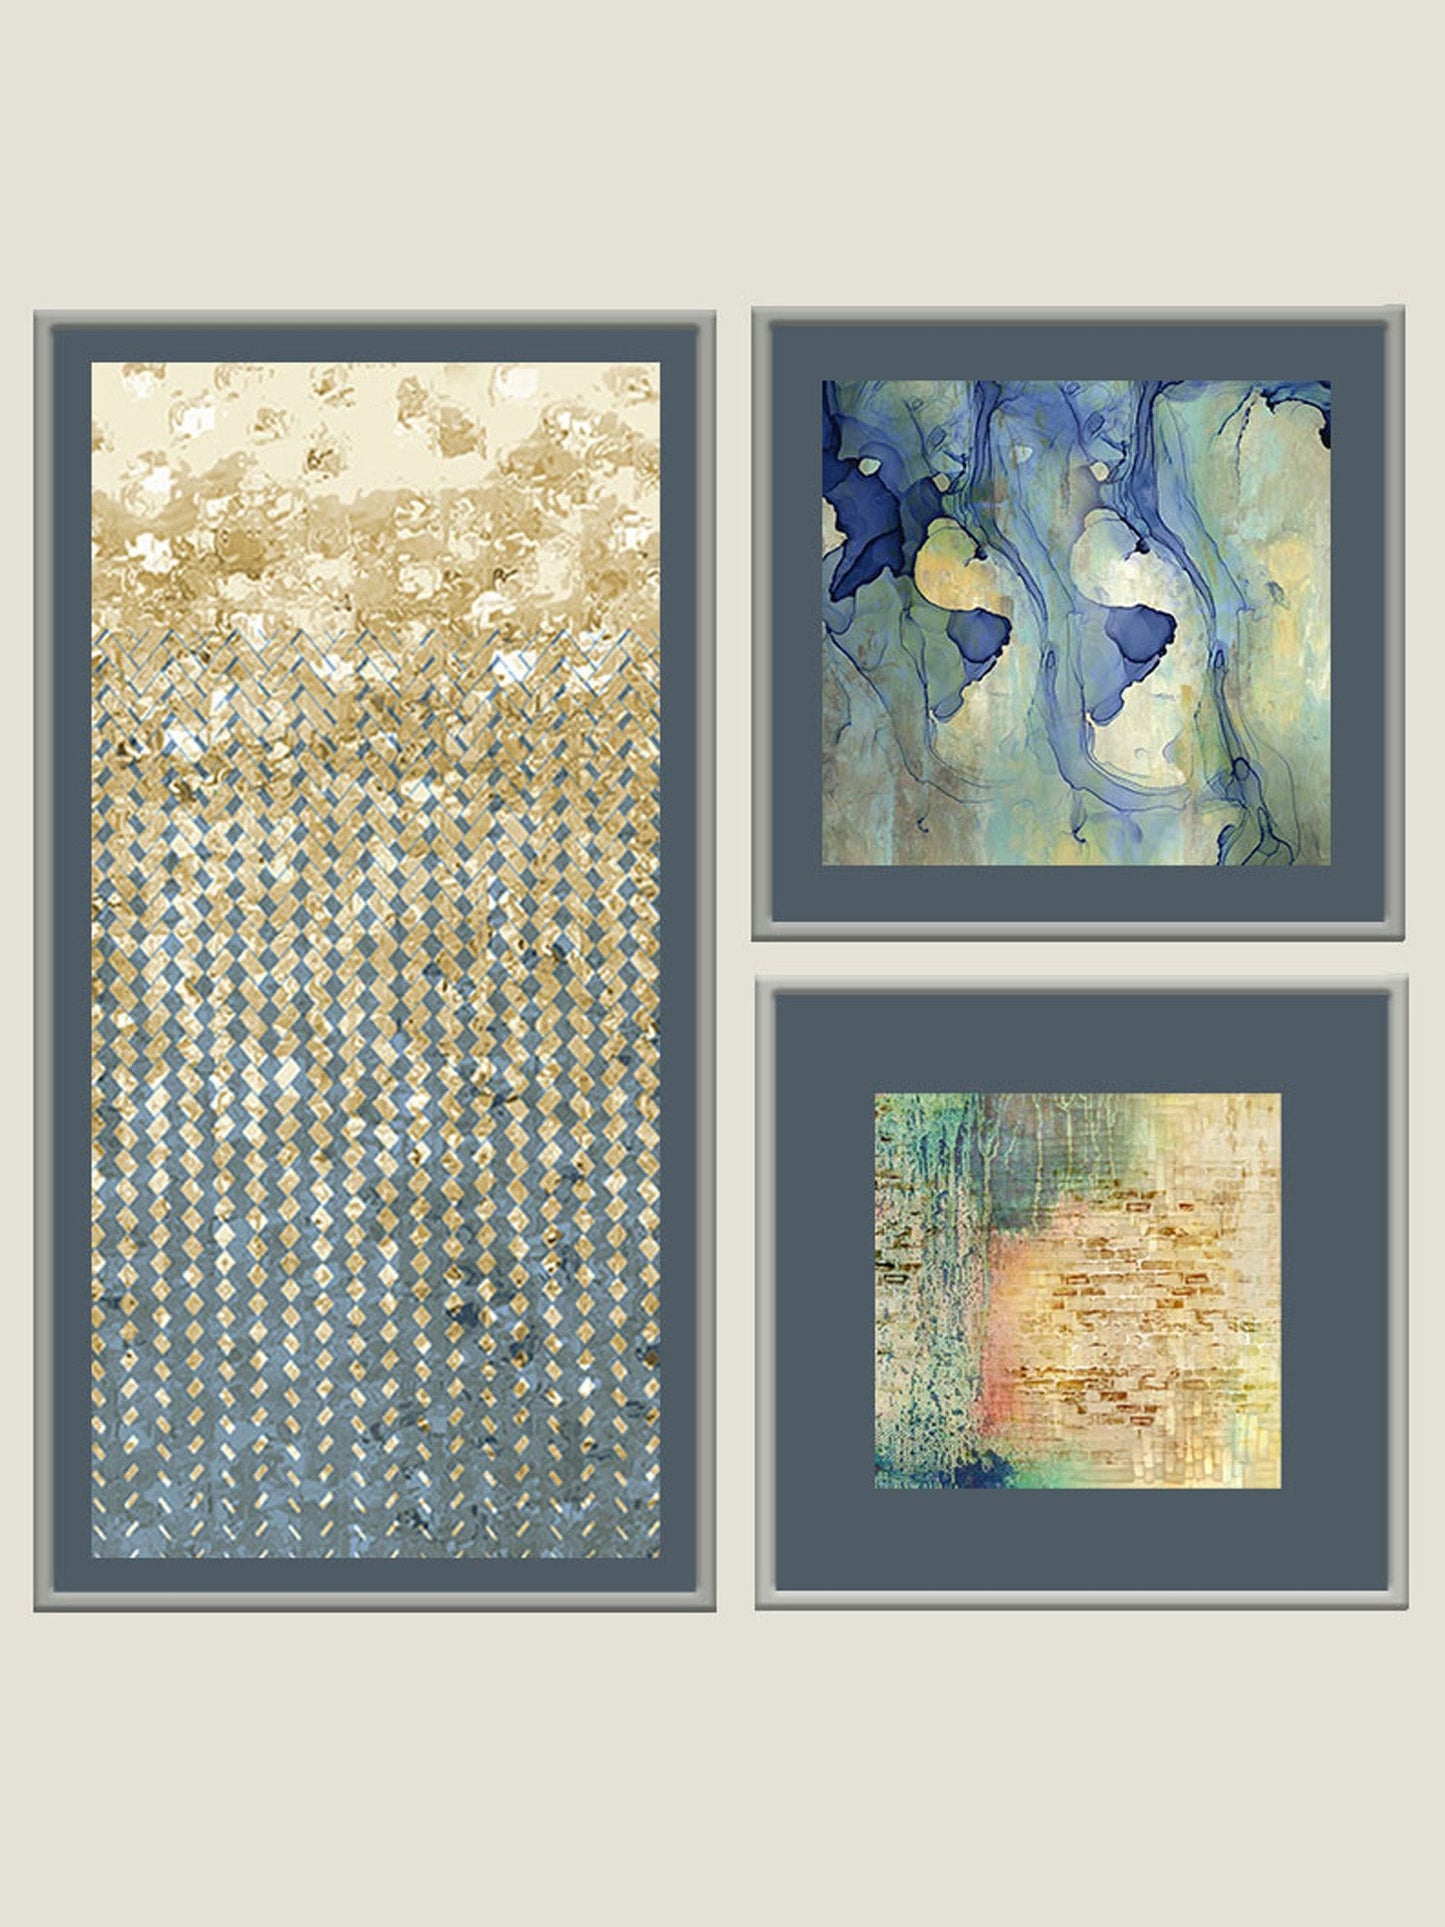 Wall Art Cluster Canvas Cerulean Streams Highlighted with hand embroidery - 24"X 48"; 24"X 24"; 24"X 24"